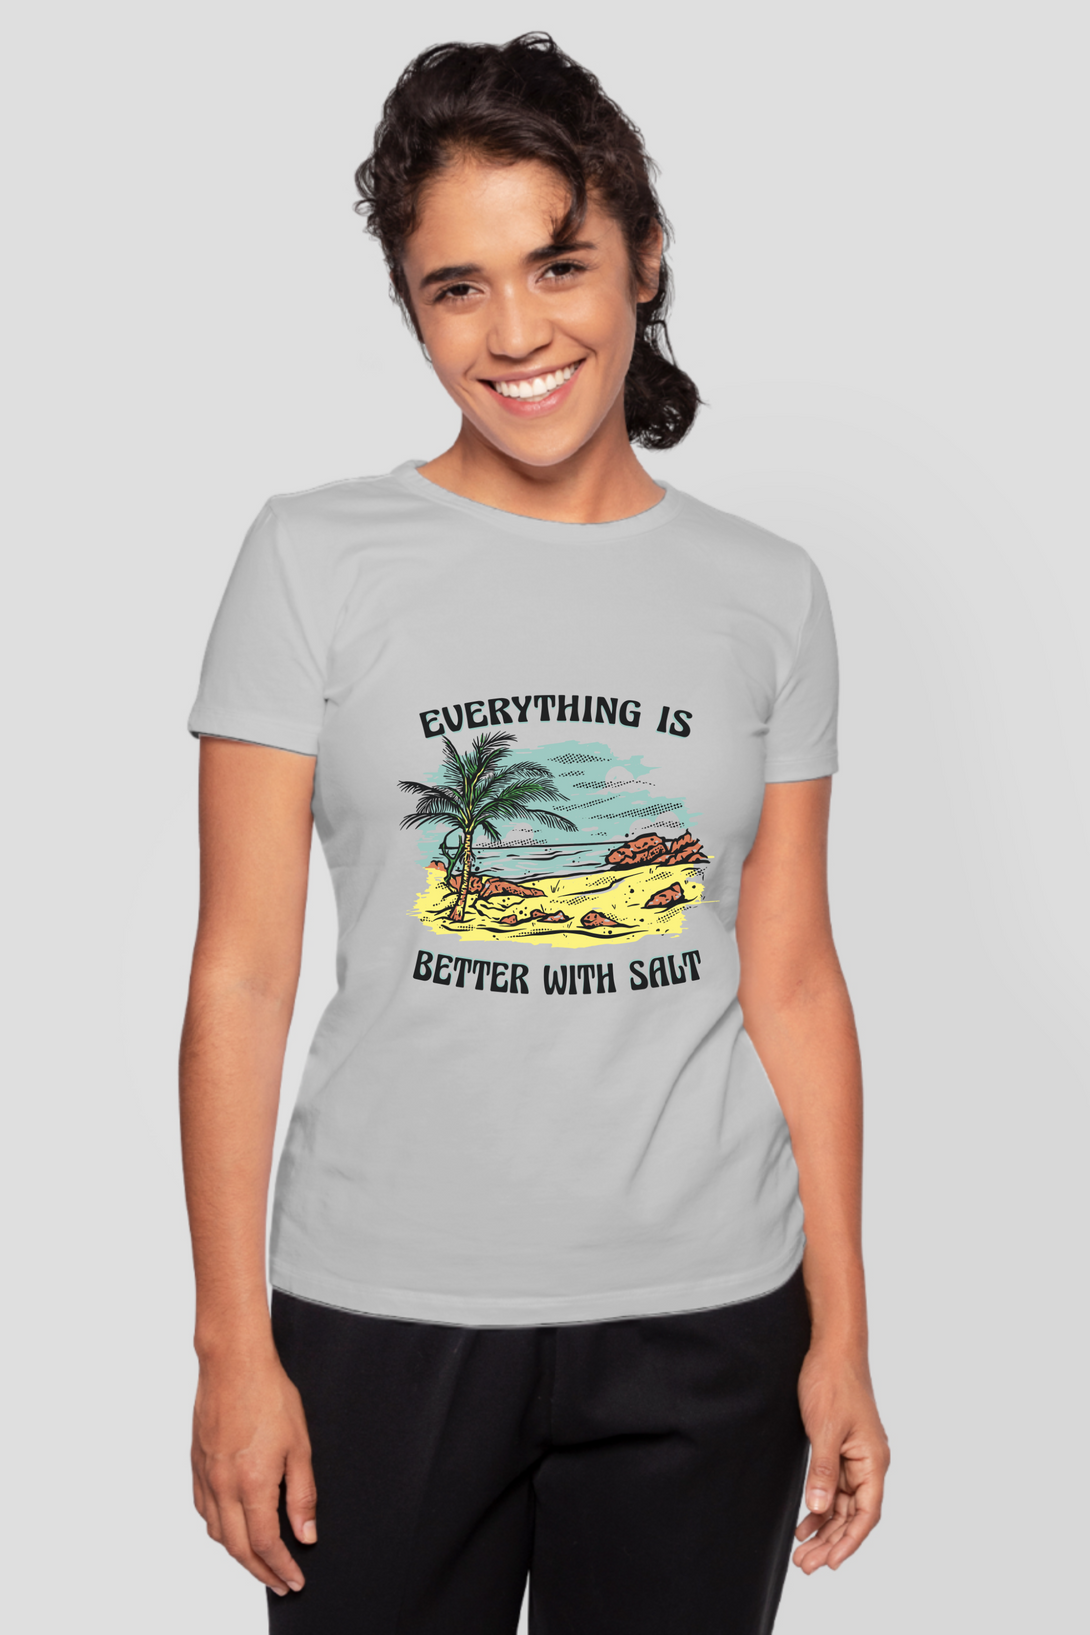 Everything Is Better With Salt Printed T-Shirt For Women - WowWaves - 11